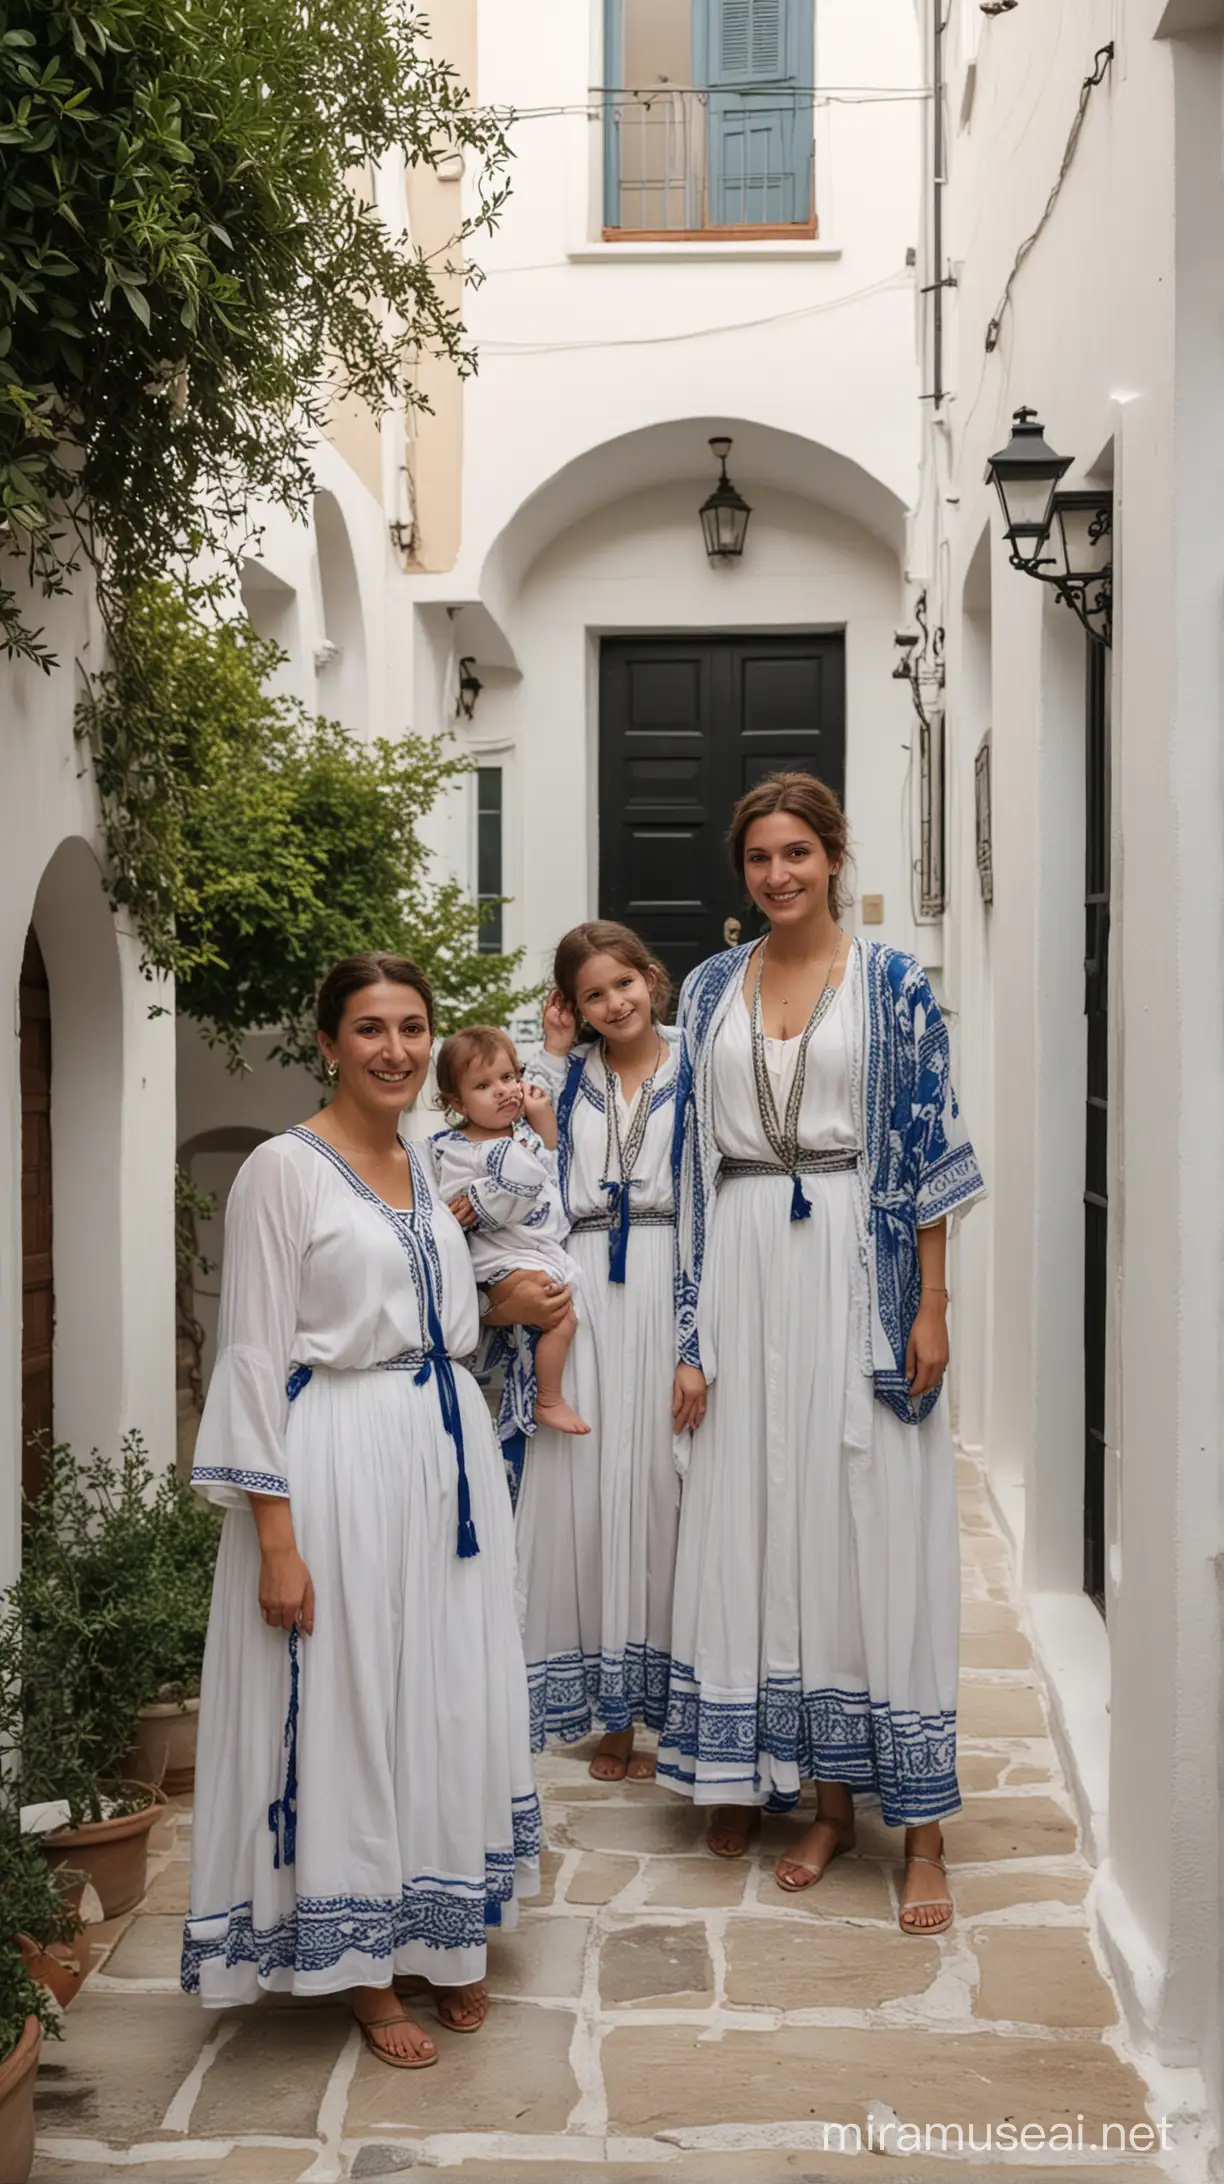 Greek Family Celebration in Traditional Attire Amidst Courtyard Ambiance